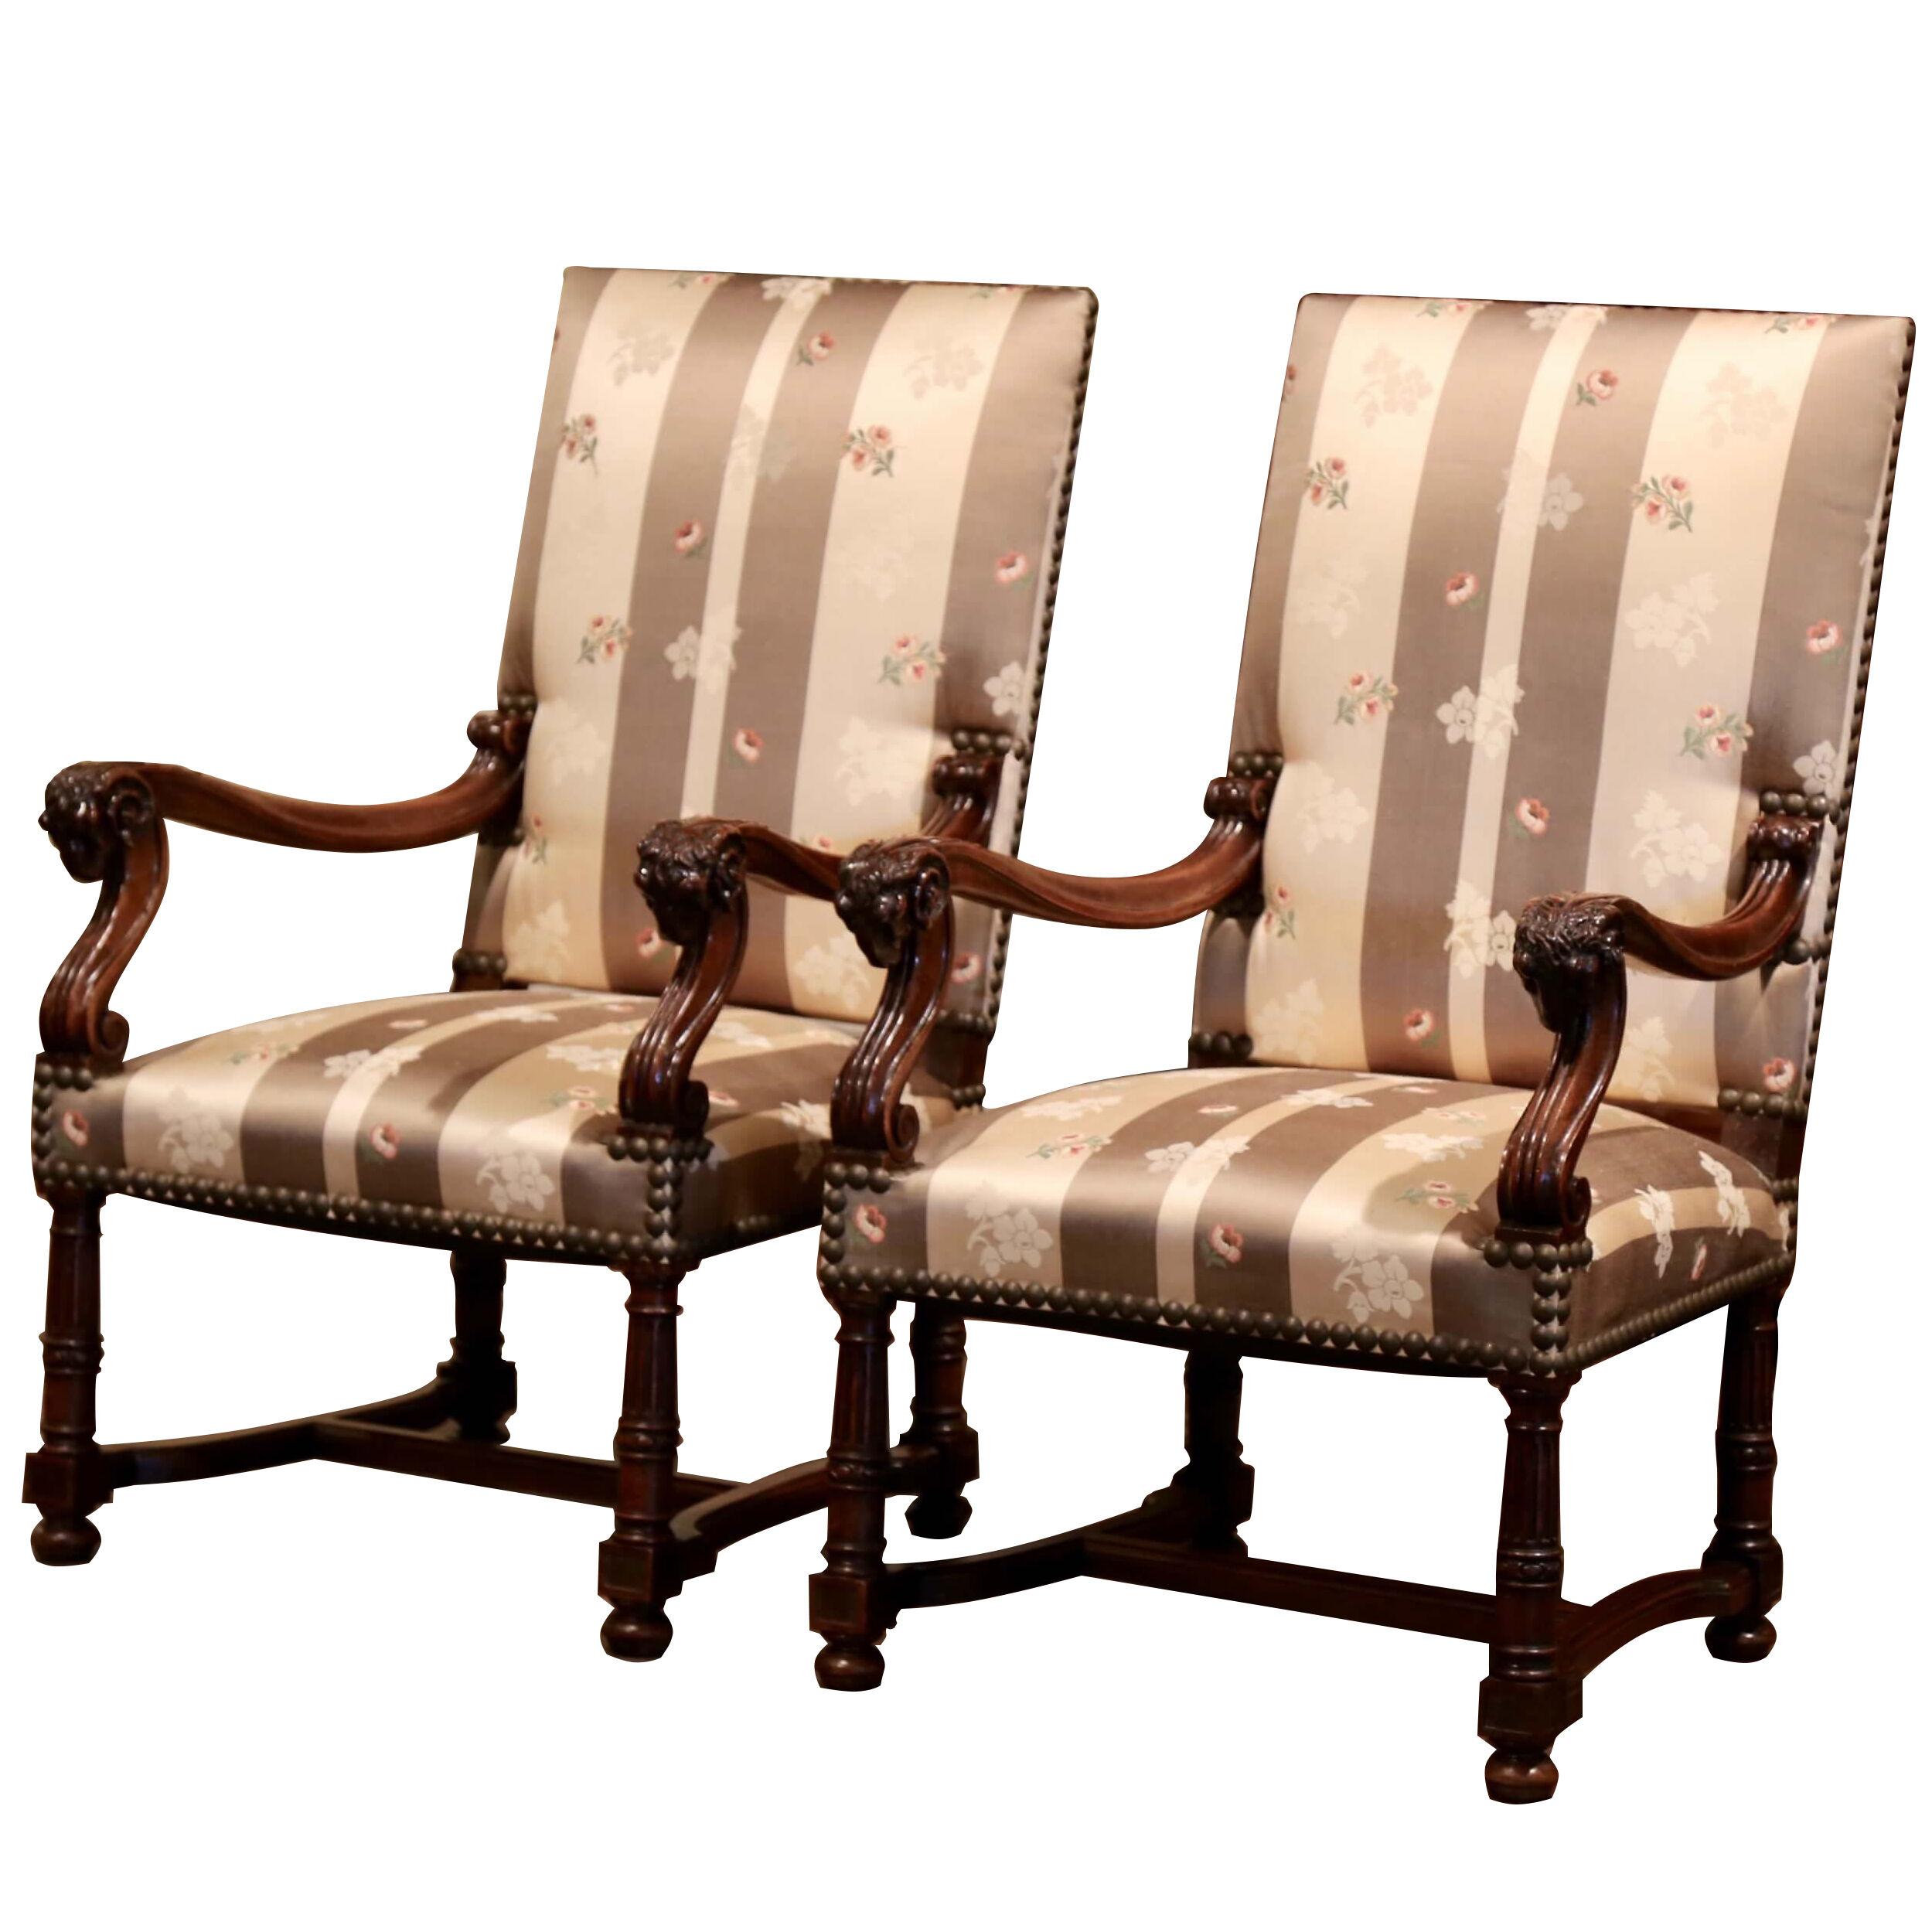 Pair of 19th Century French Louis XIII Carved Walnut Armchairs with Ram Decor